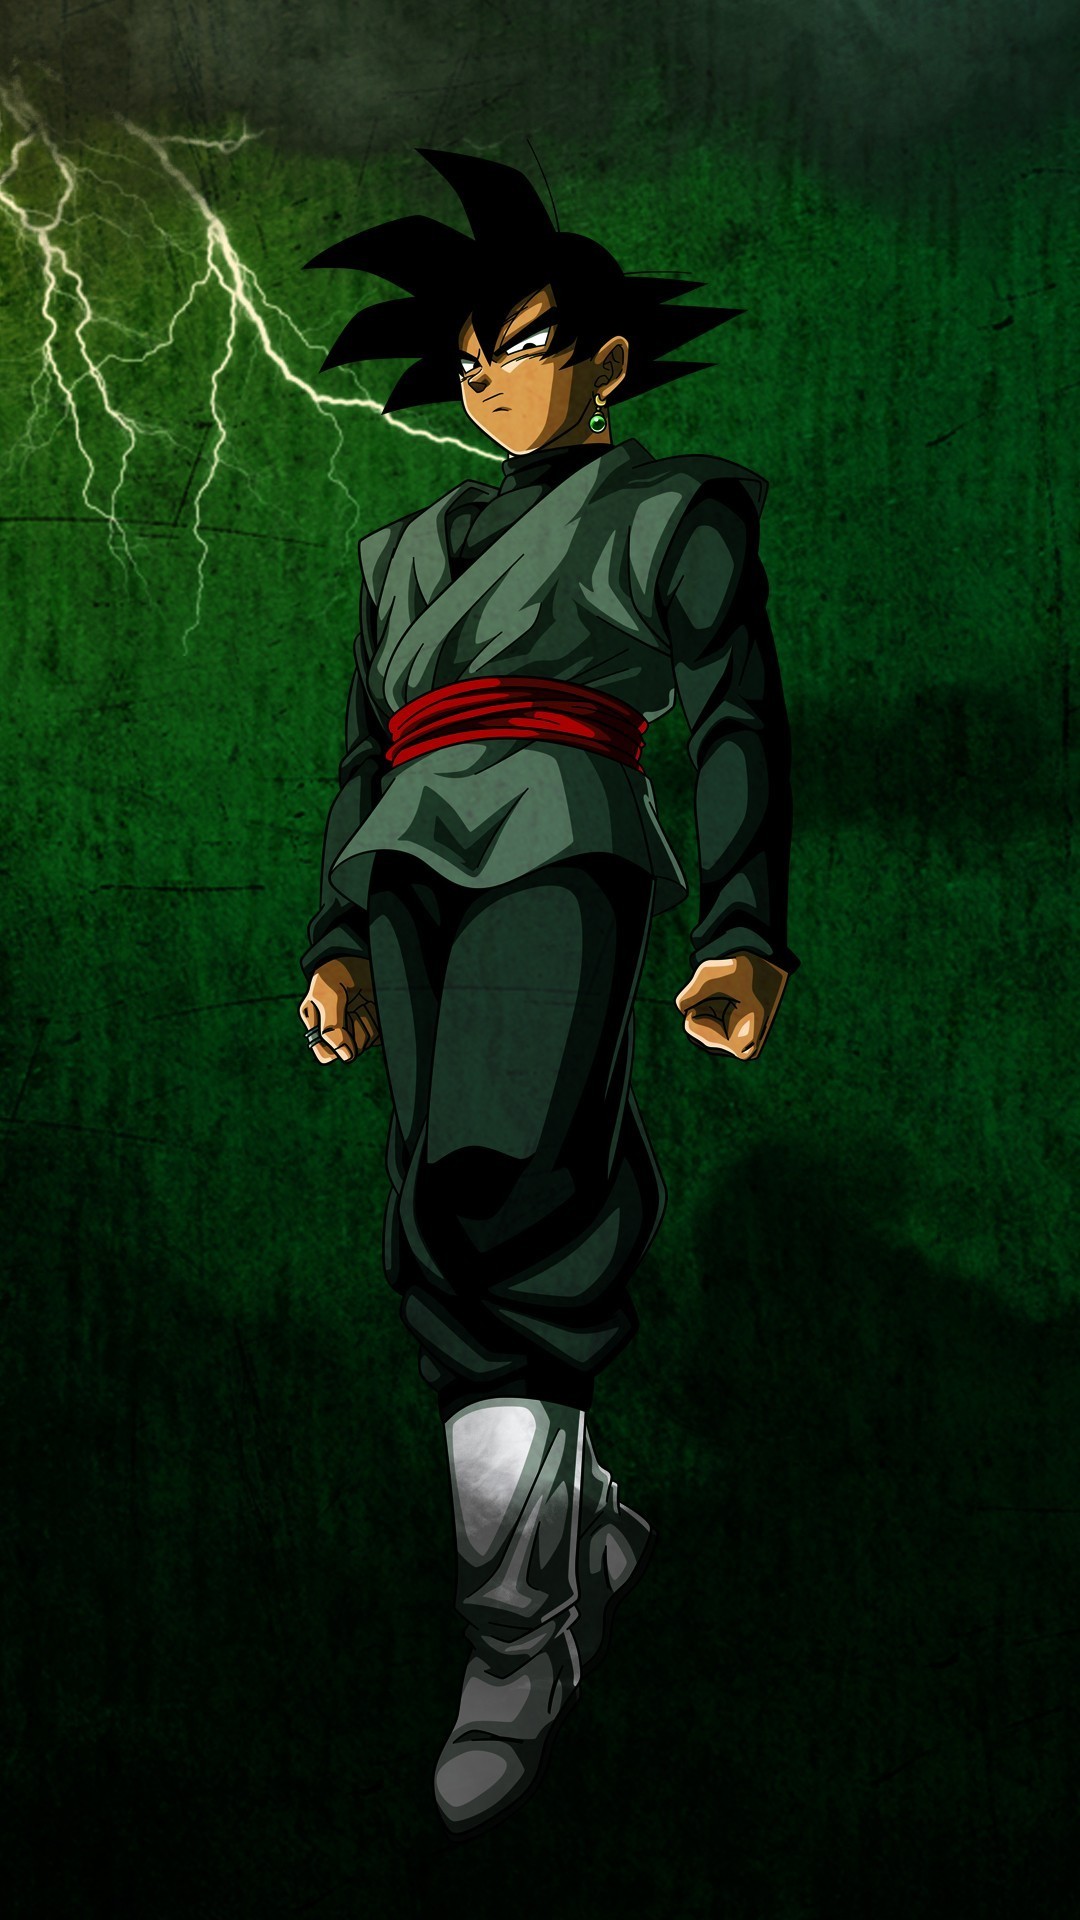 iPhone 7 Wallpaper Black Goku with image resolution 1080x1920 pixel. You can make this wallpaper for your iPhone 5, 6, 7, 8, X backgrounds, Mobile Screensaver, or iPad Lock Screen